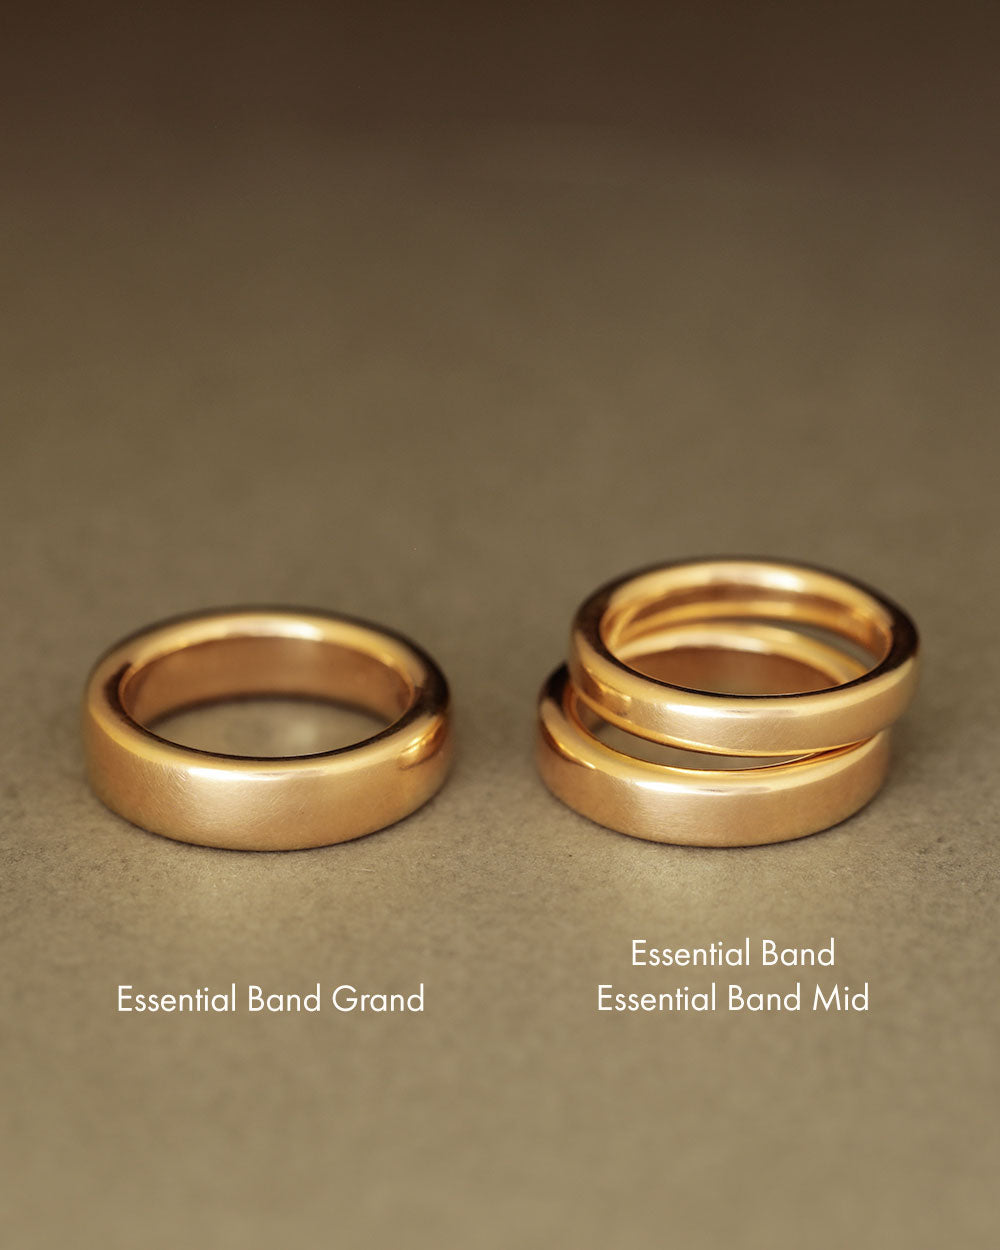 Comparison of Essential Band, Essential Band Mid, Essential Band Grand solid 18k yellow gold wedding bands by George Rings